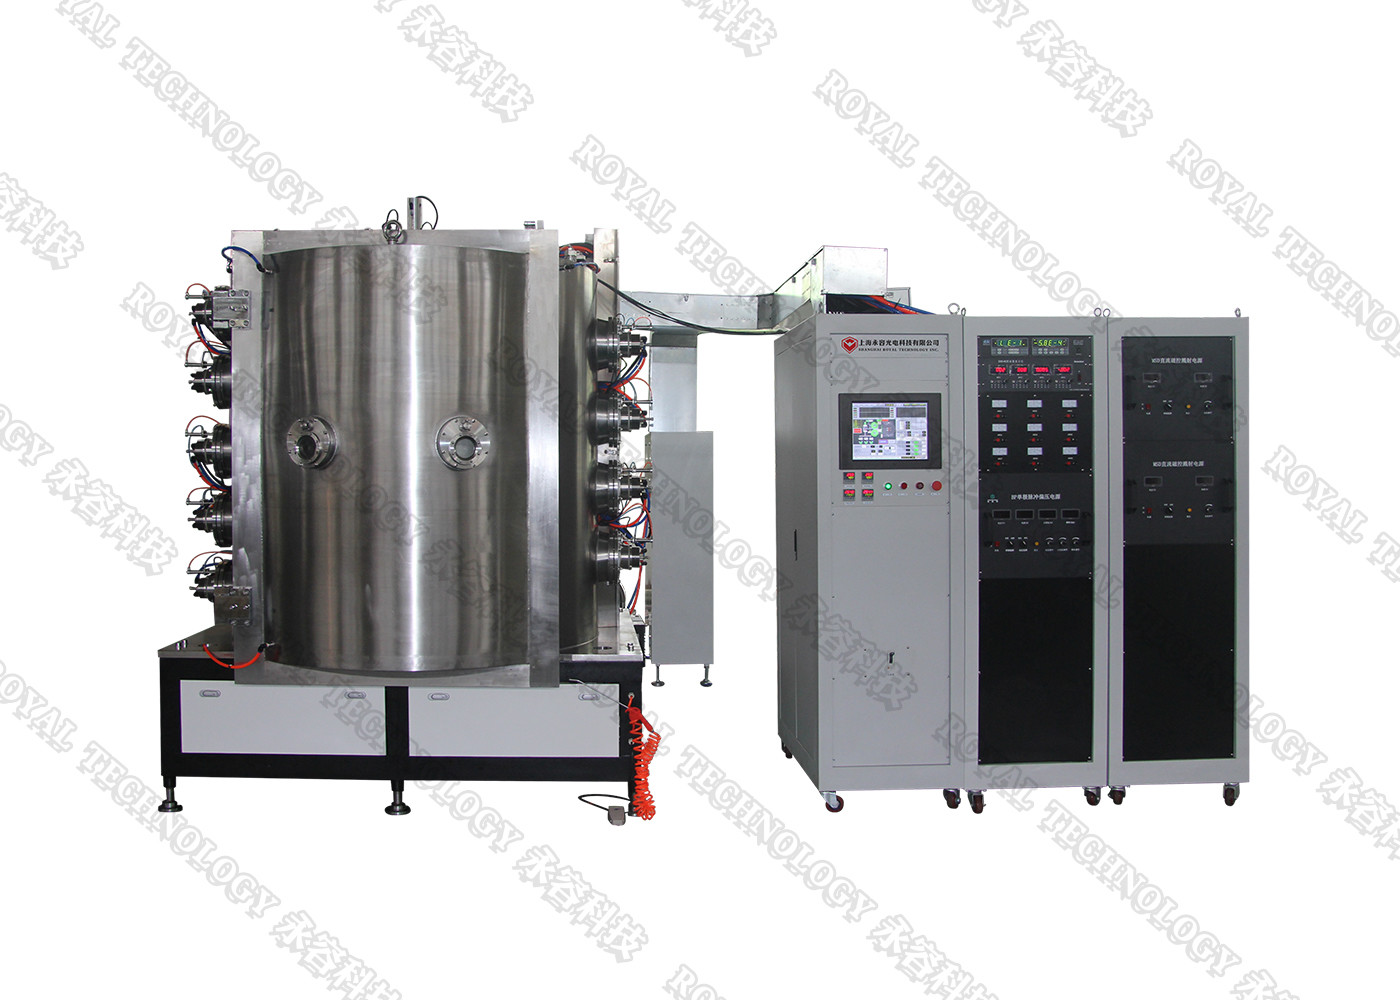 Multi Arc Vacuum Coating Machine Fast Deposition For Glass Candle Holders